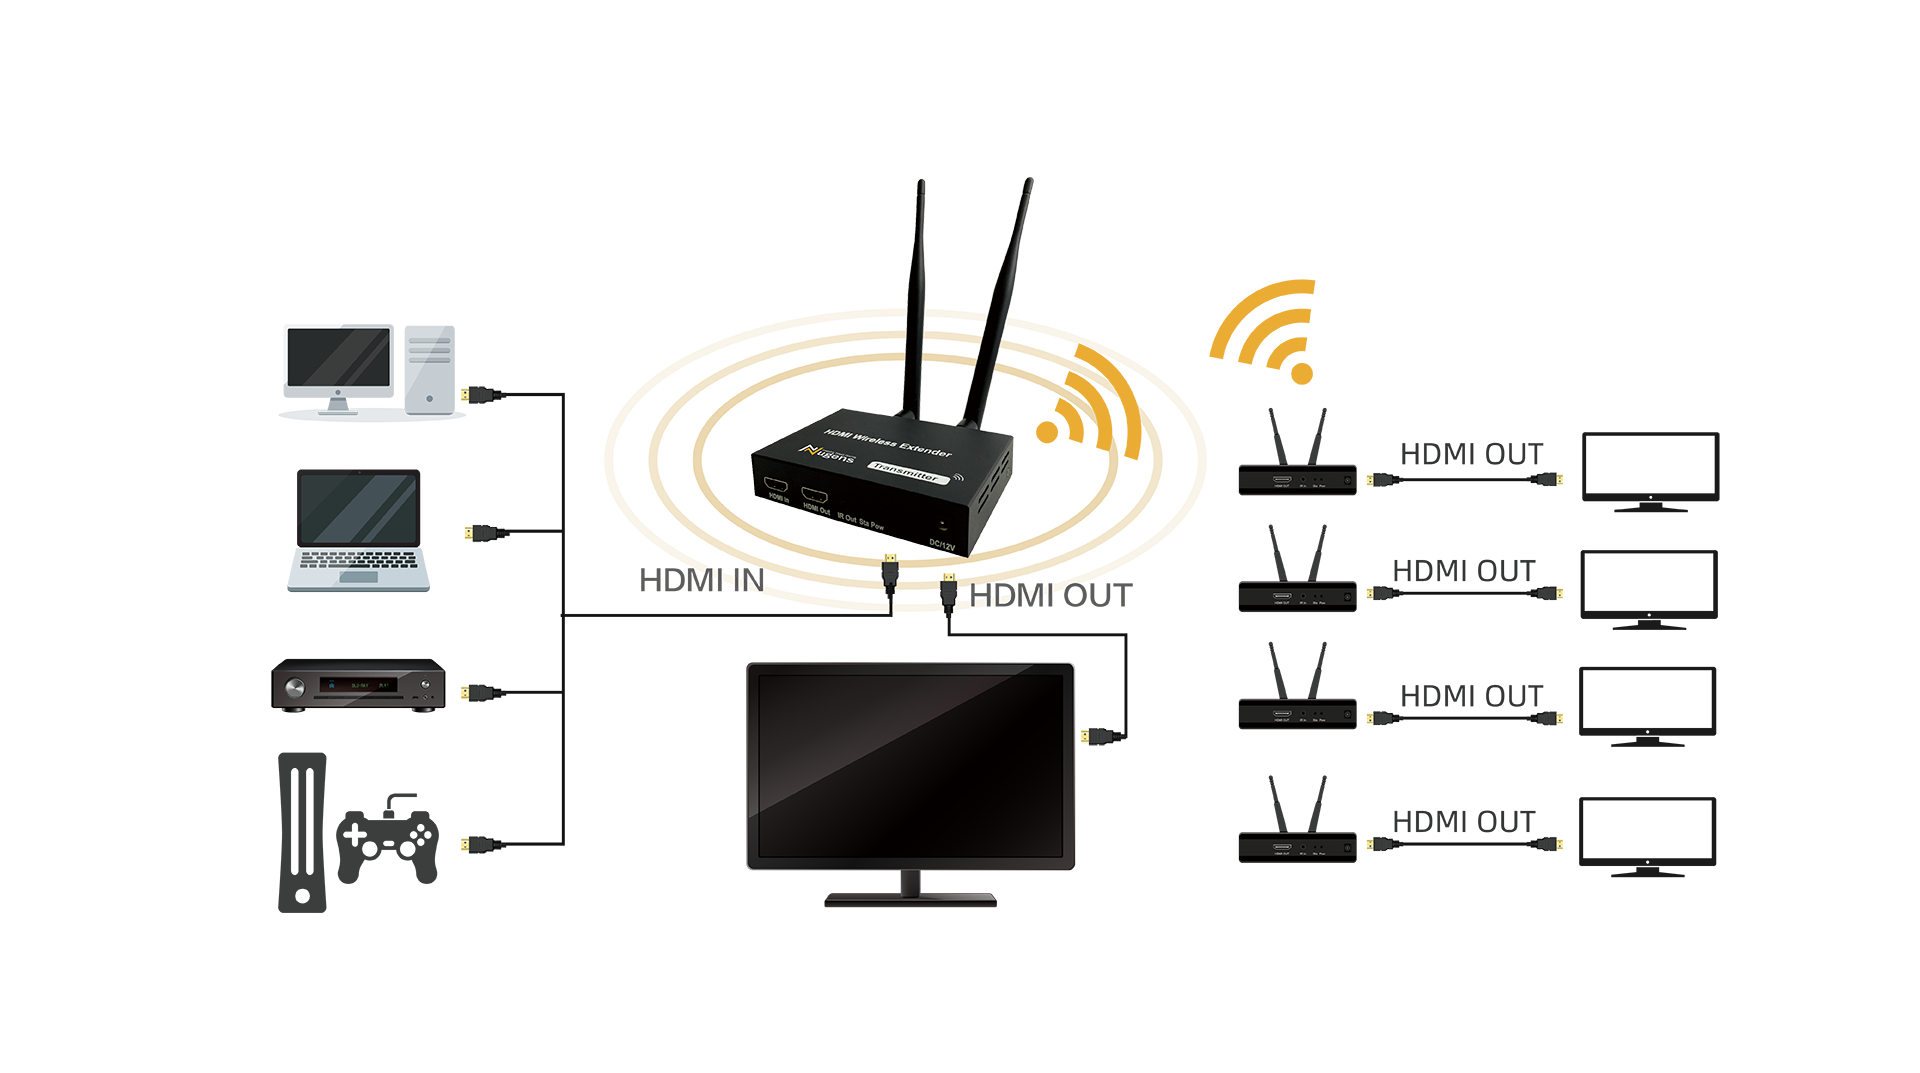 Schematic diagram of Nugens HDMI Wireless Extender displaying 4 devices at the same time